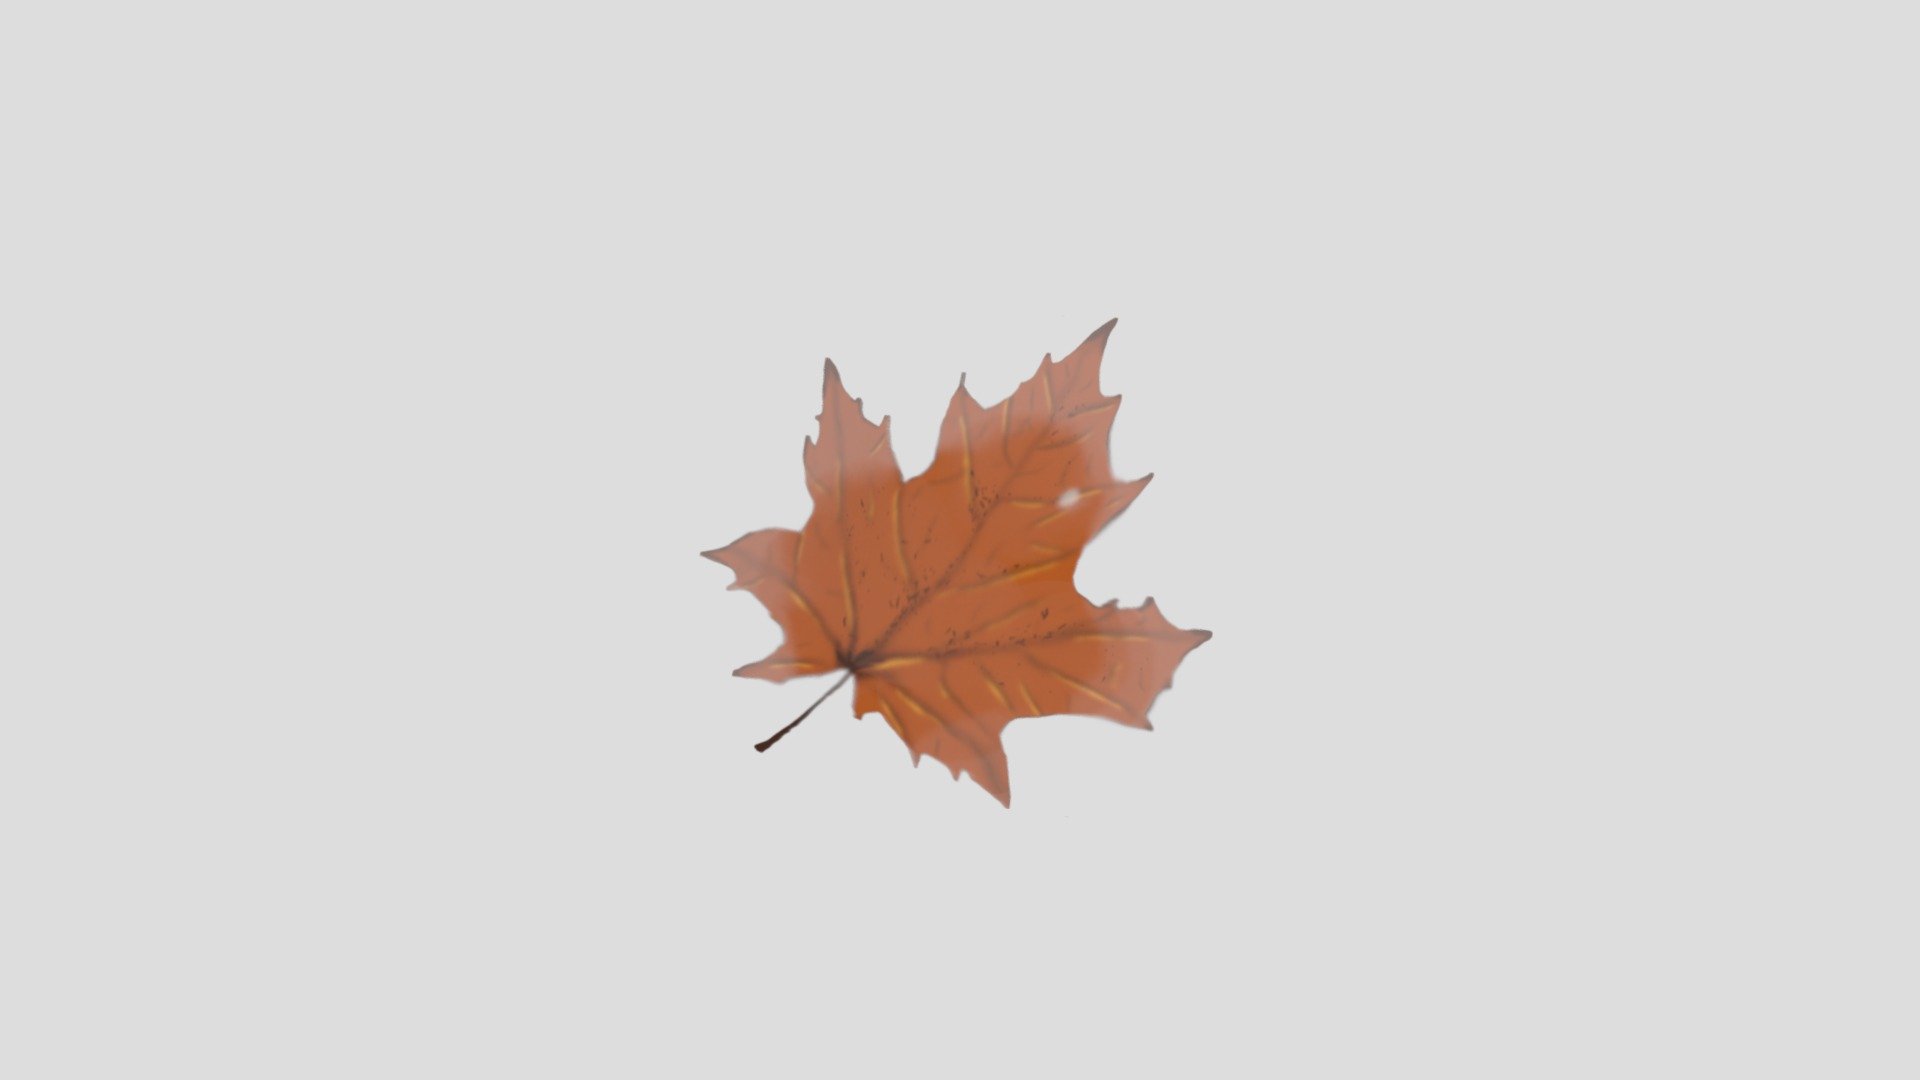 A practaice making leaves and using trancparency 3d model